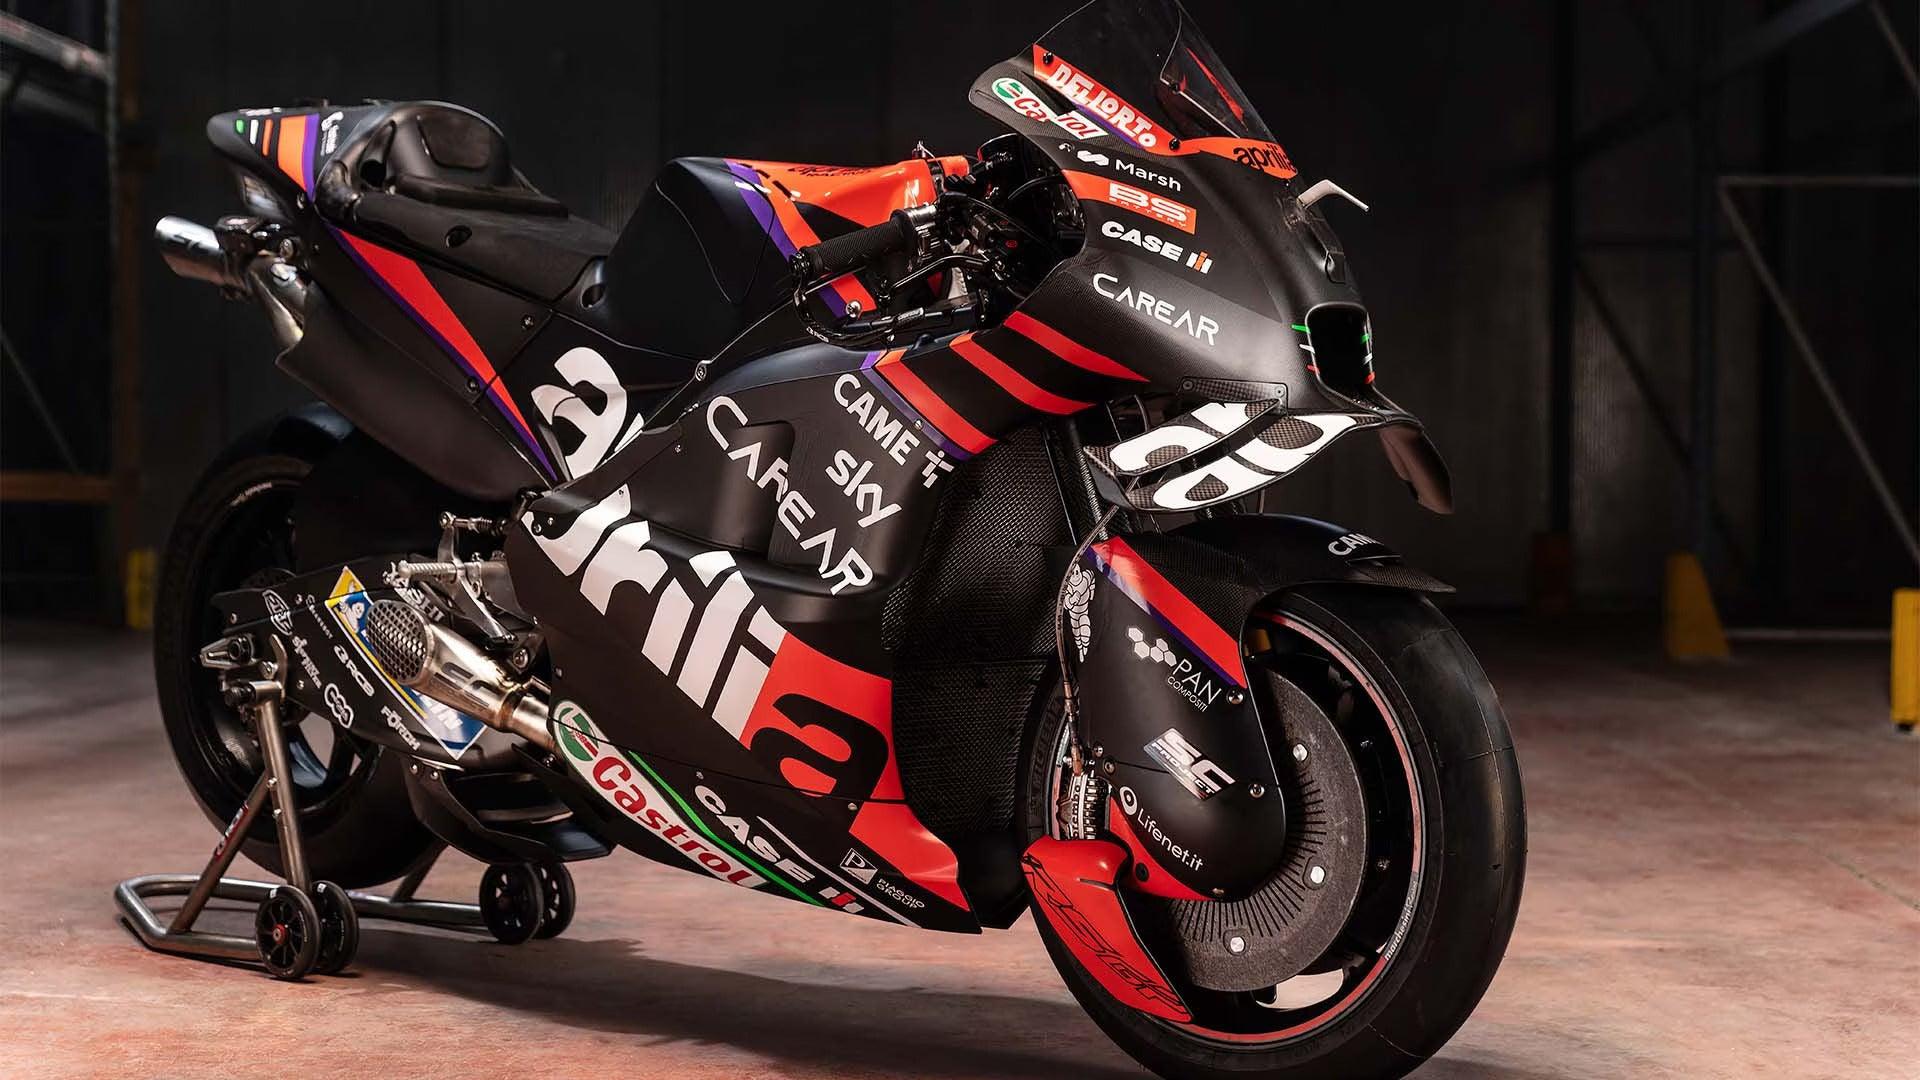 MotoGP Team Aprilia have unveiled their 2023 livery for their RS-GP23 - MotoProWorks